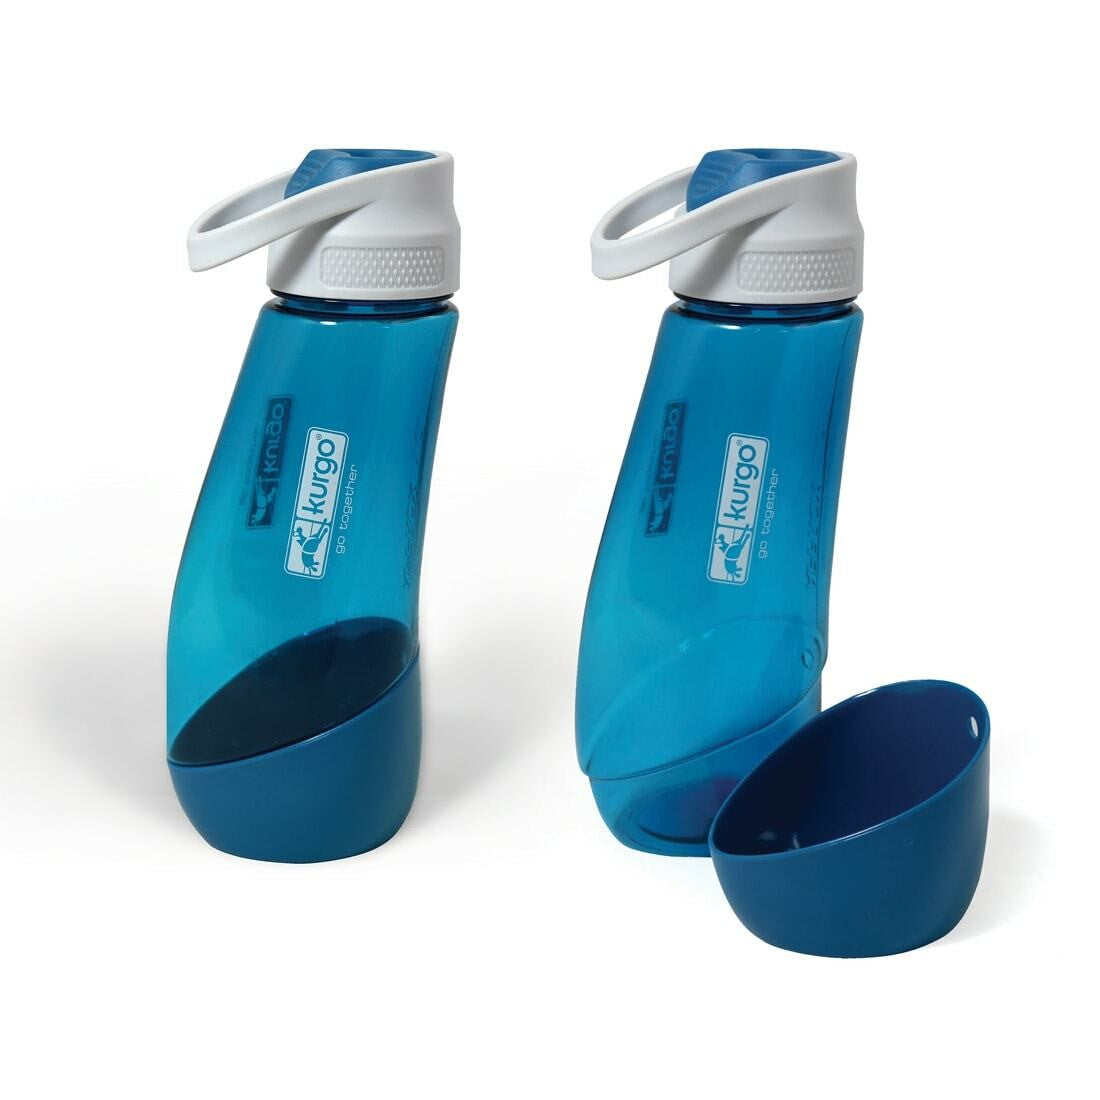 Two blue Contigo water bottles with open lids and caps.